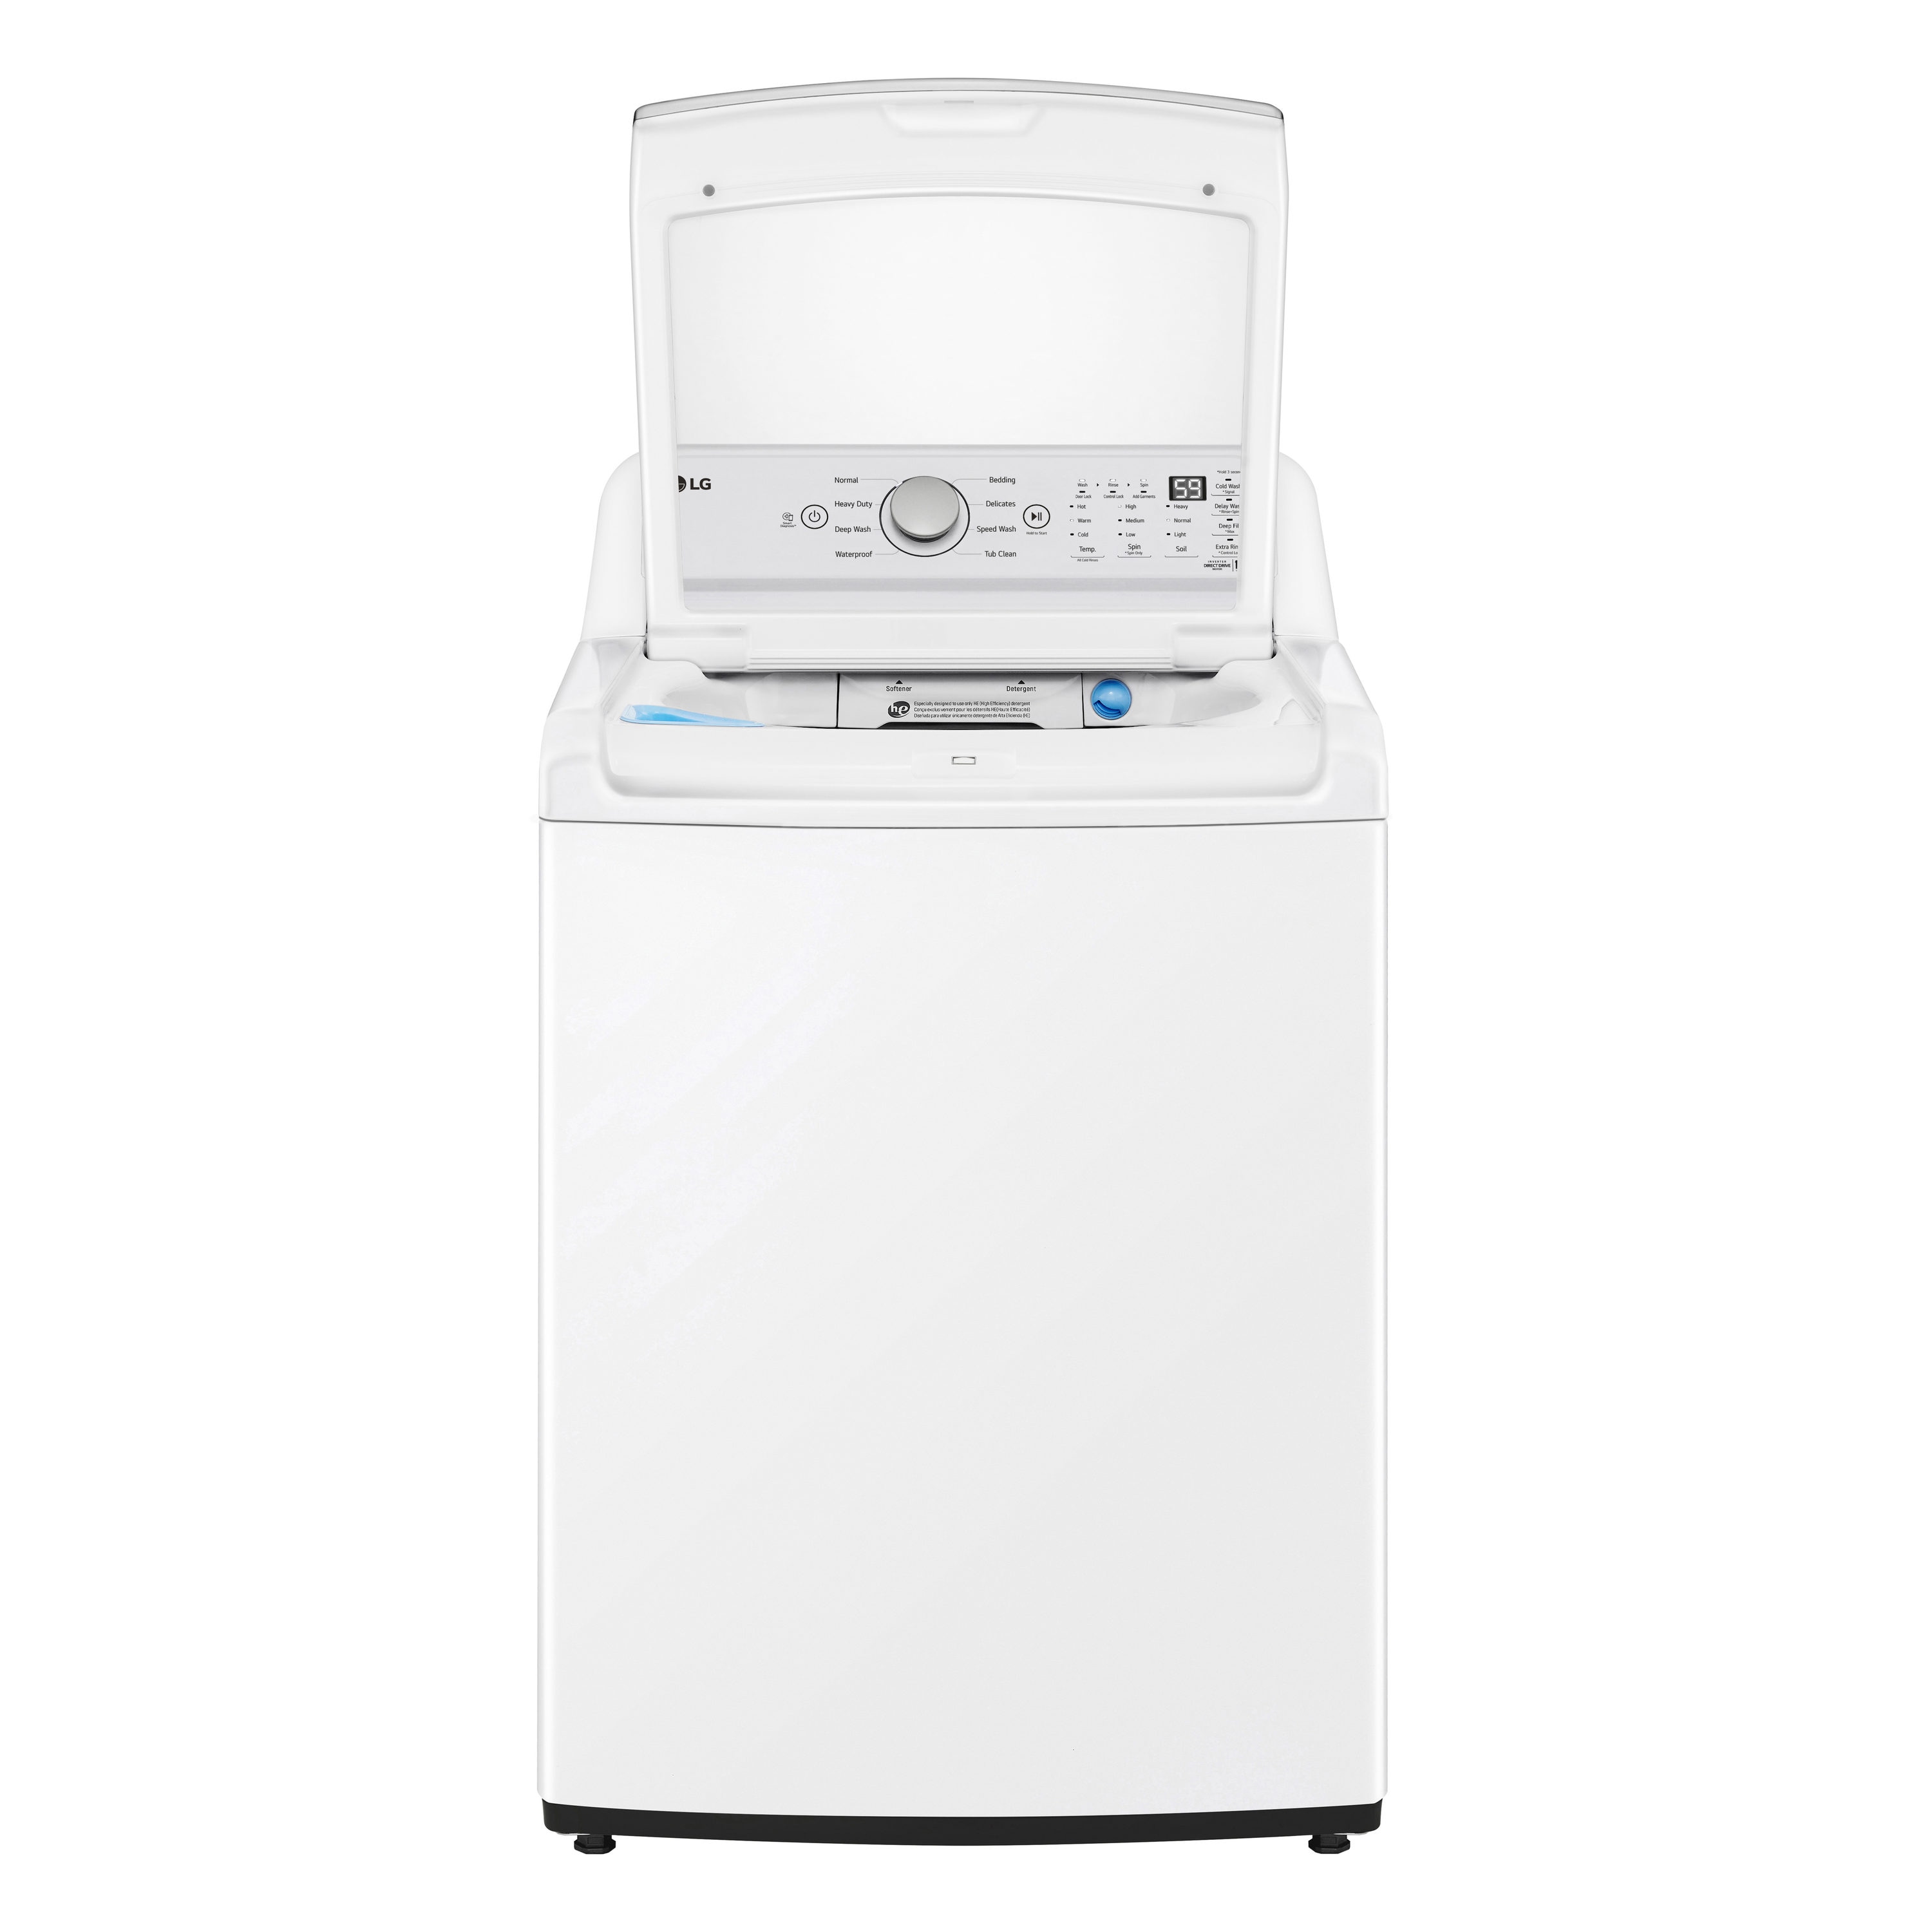 LG 4.8-cu ft High Efficiency Agitator Top-Load Washer (White) ENERGY STAR  in the Top-Load Washers department at